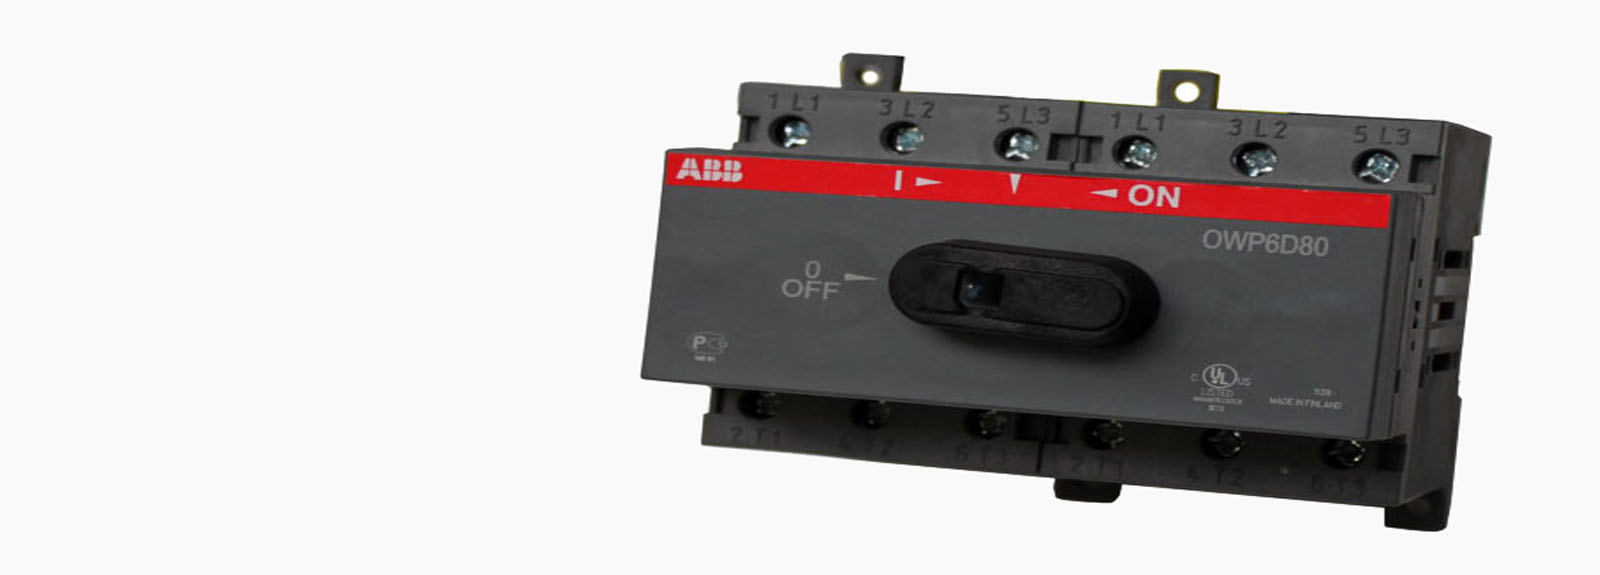 ABB change over switch